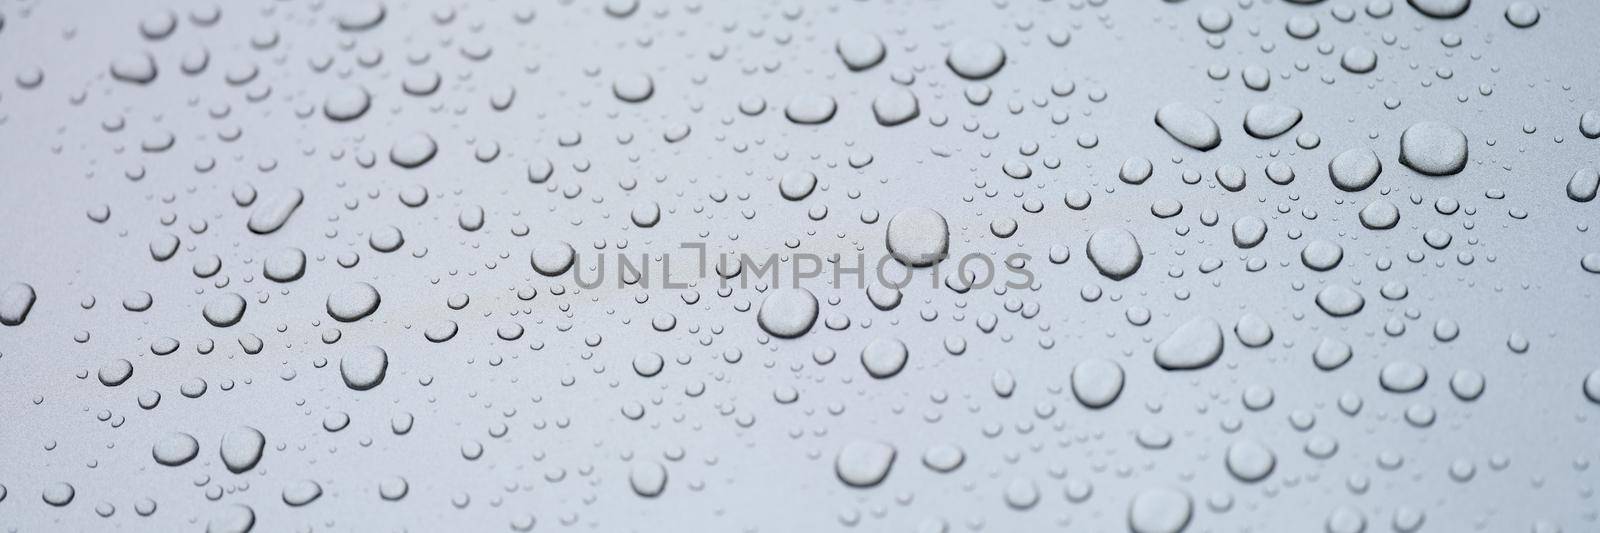 Water drops on glass, gray rainy background, close-up. Sadness and loneliness. Cleanliness and freshness. Design element